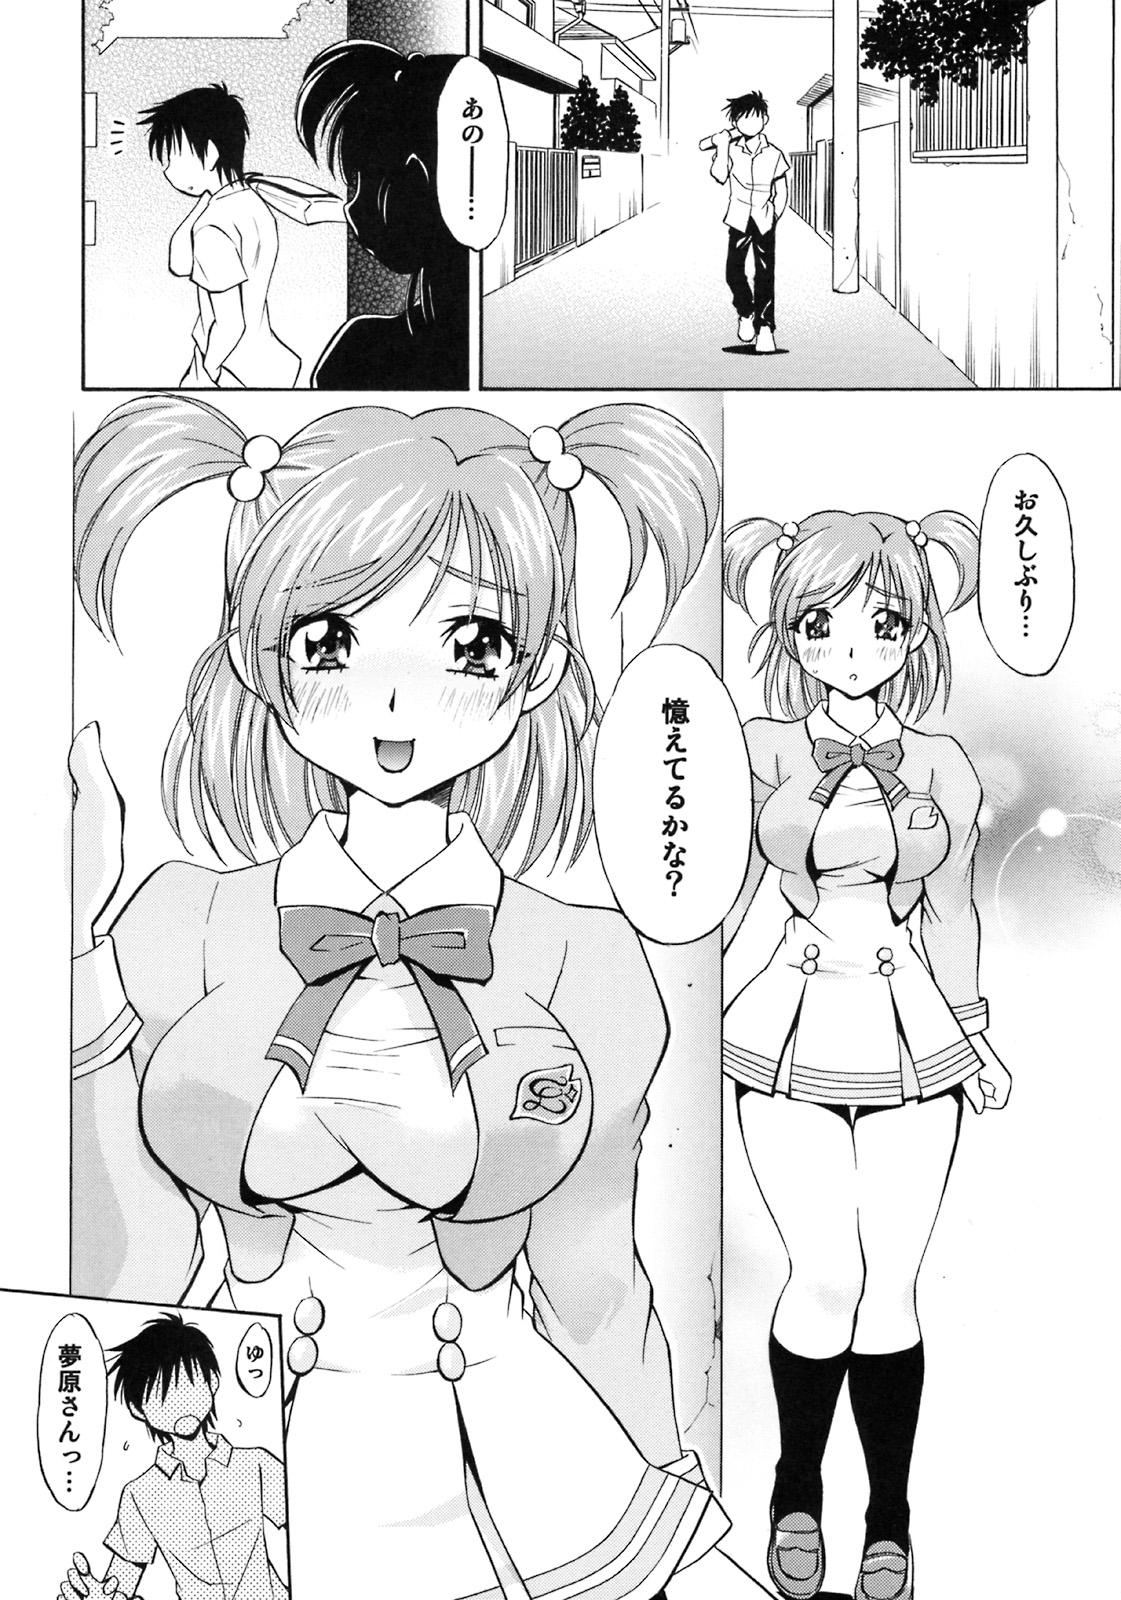 Kiss Cure Musume Karen & Nozomi - Yes precure 5 Exhib - Page 5